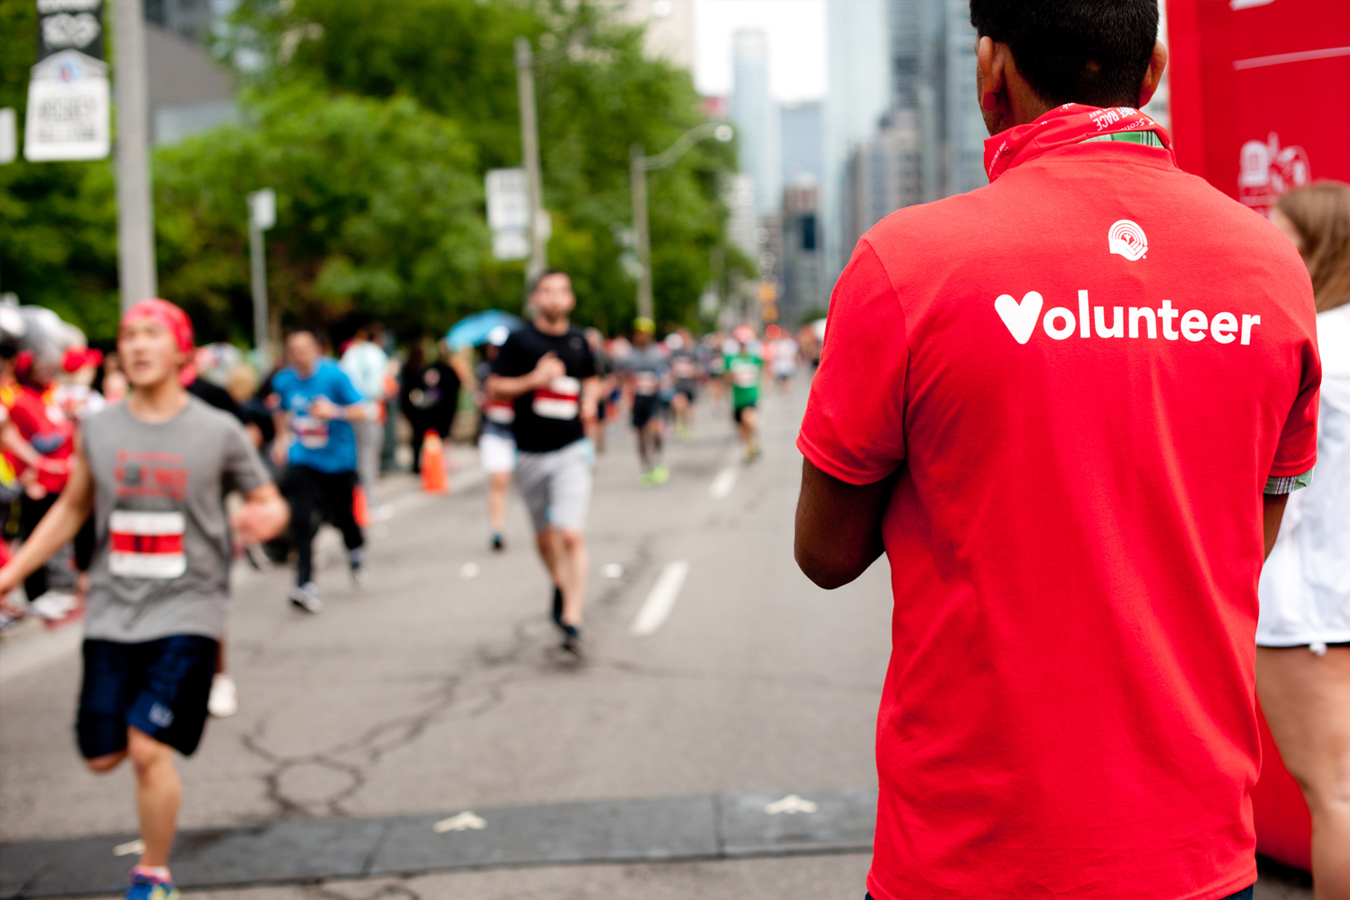 Man in red shirt reading Volunteer with people running race in background